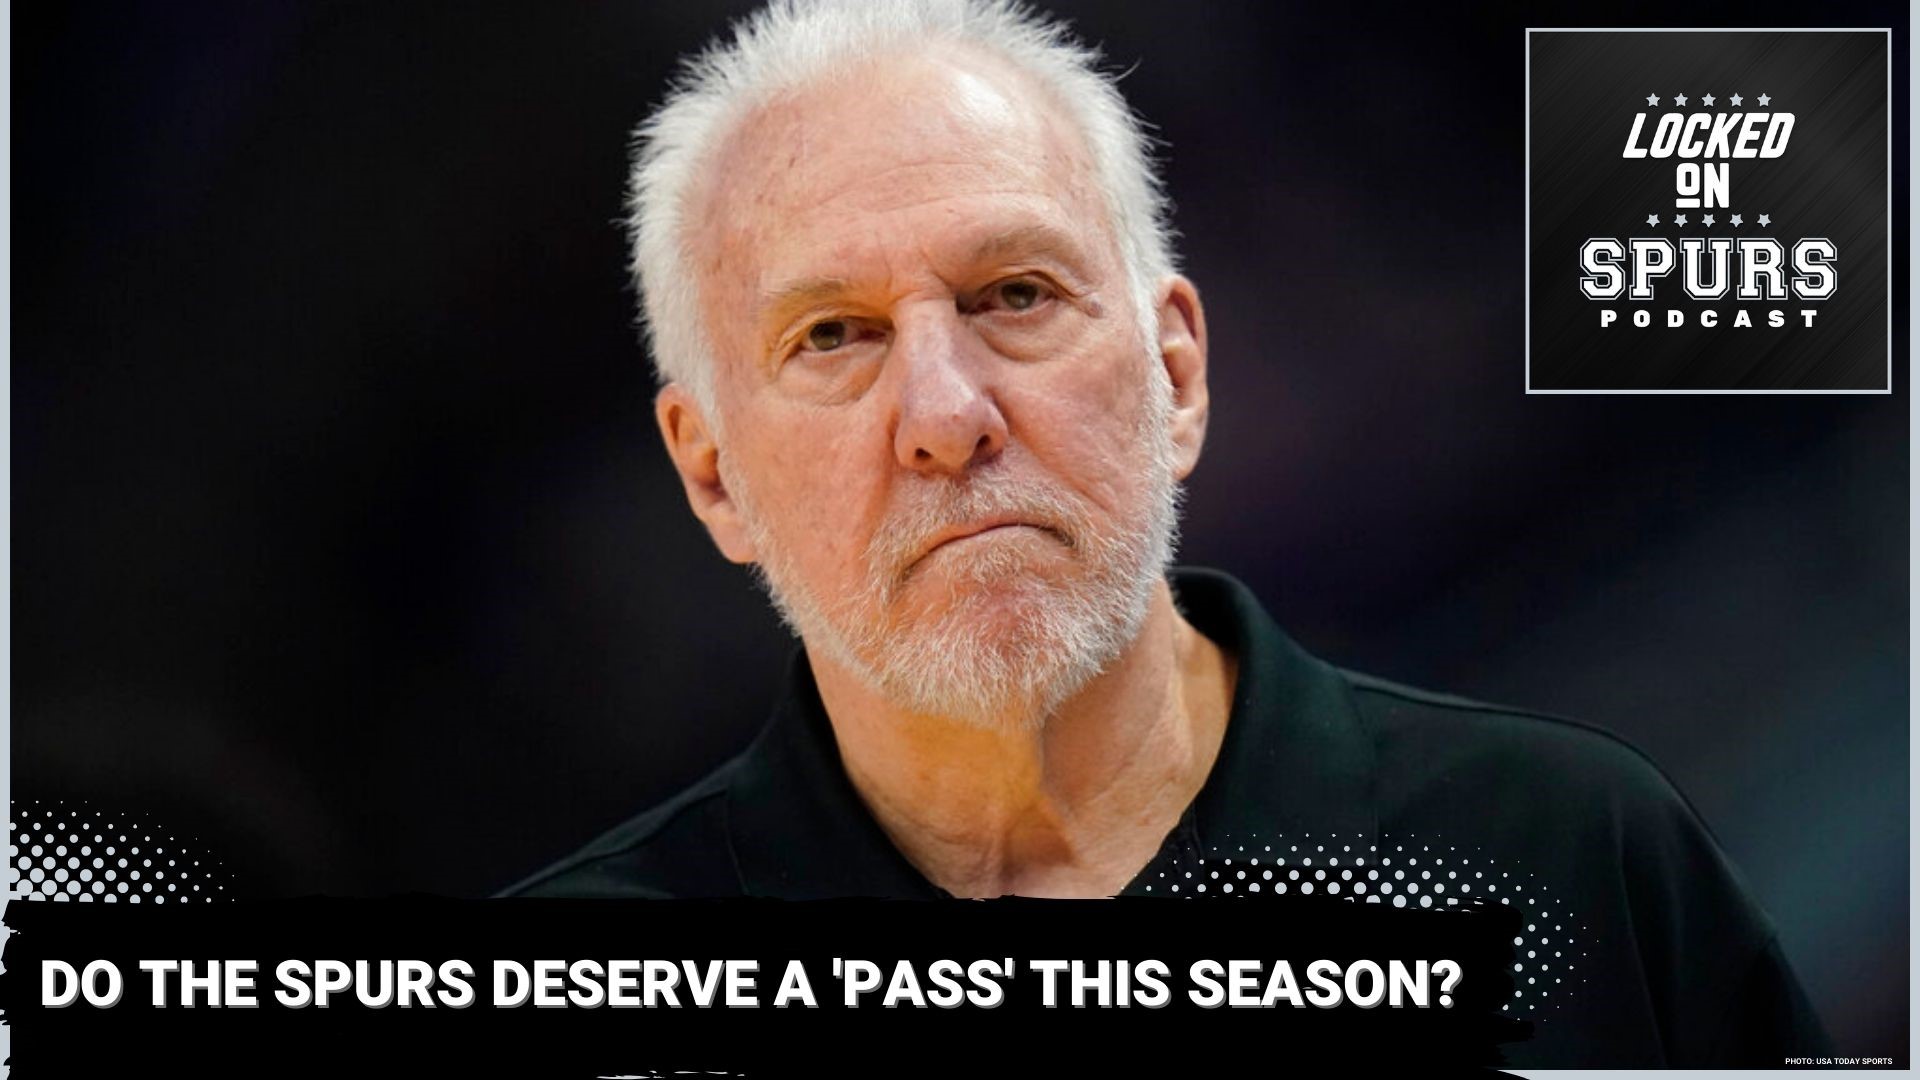 Despite the poor record, shouldn't the Spurs be given the benefit of the doubt?